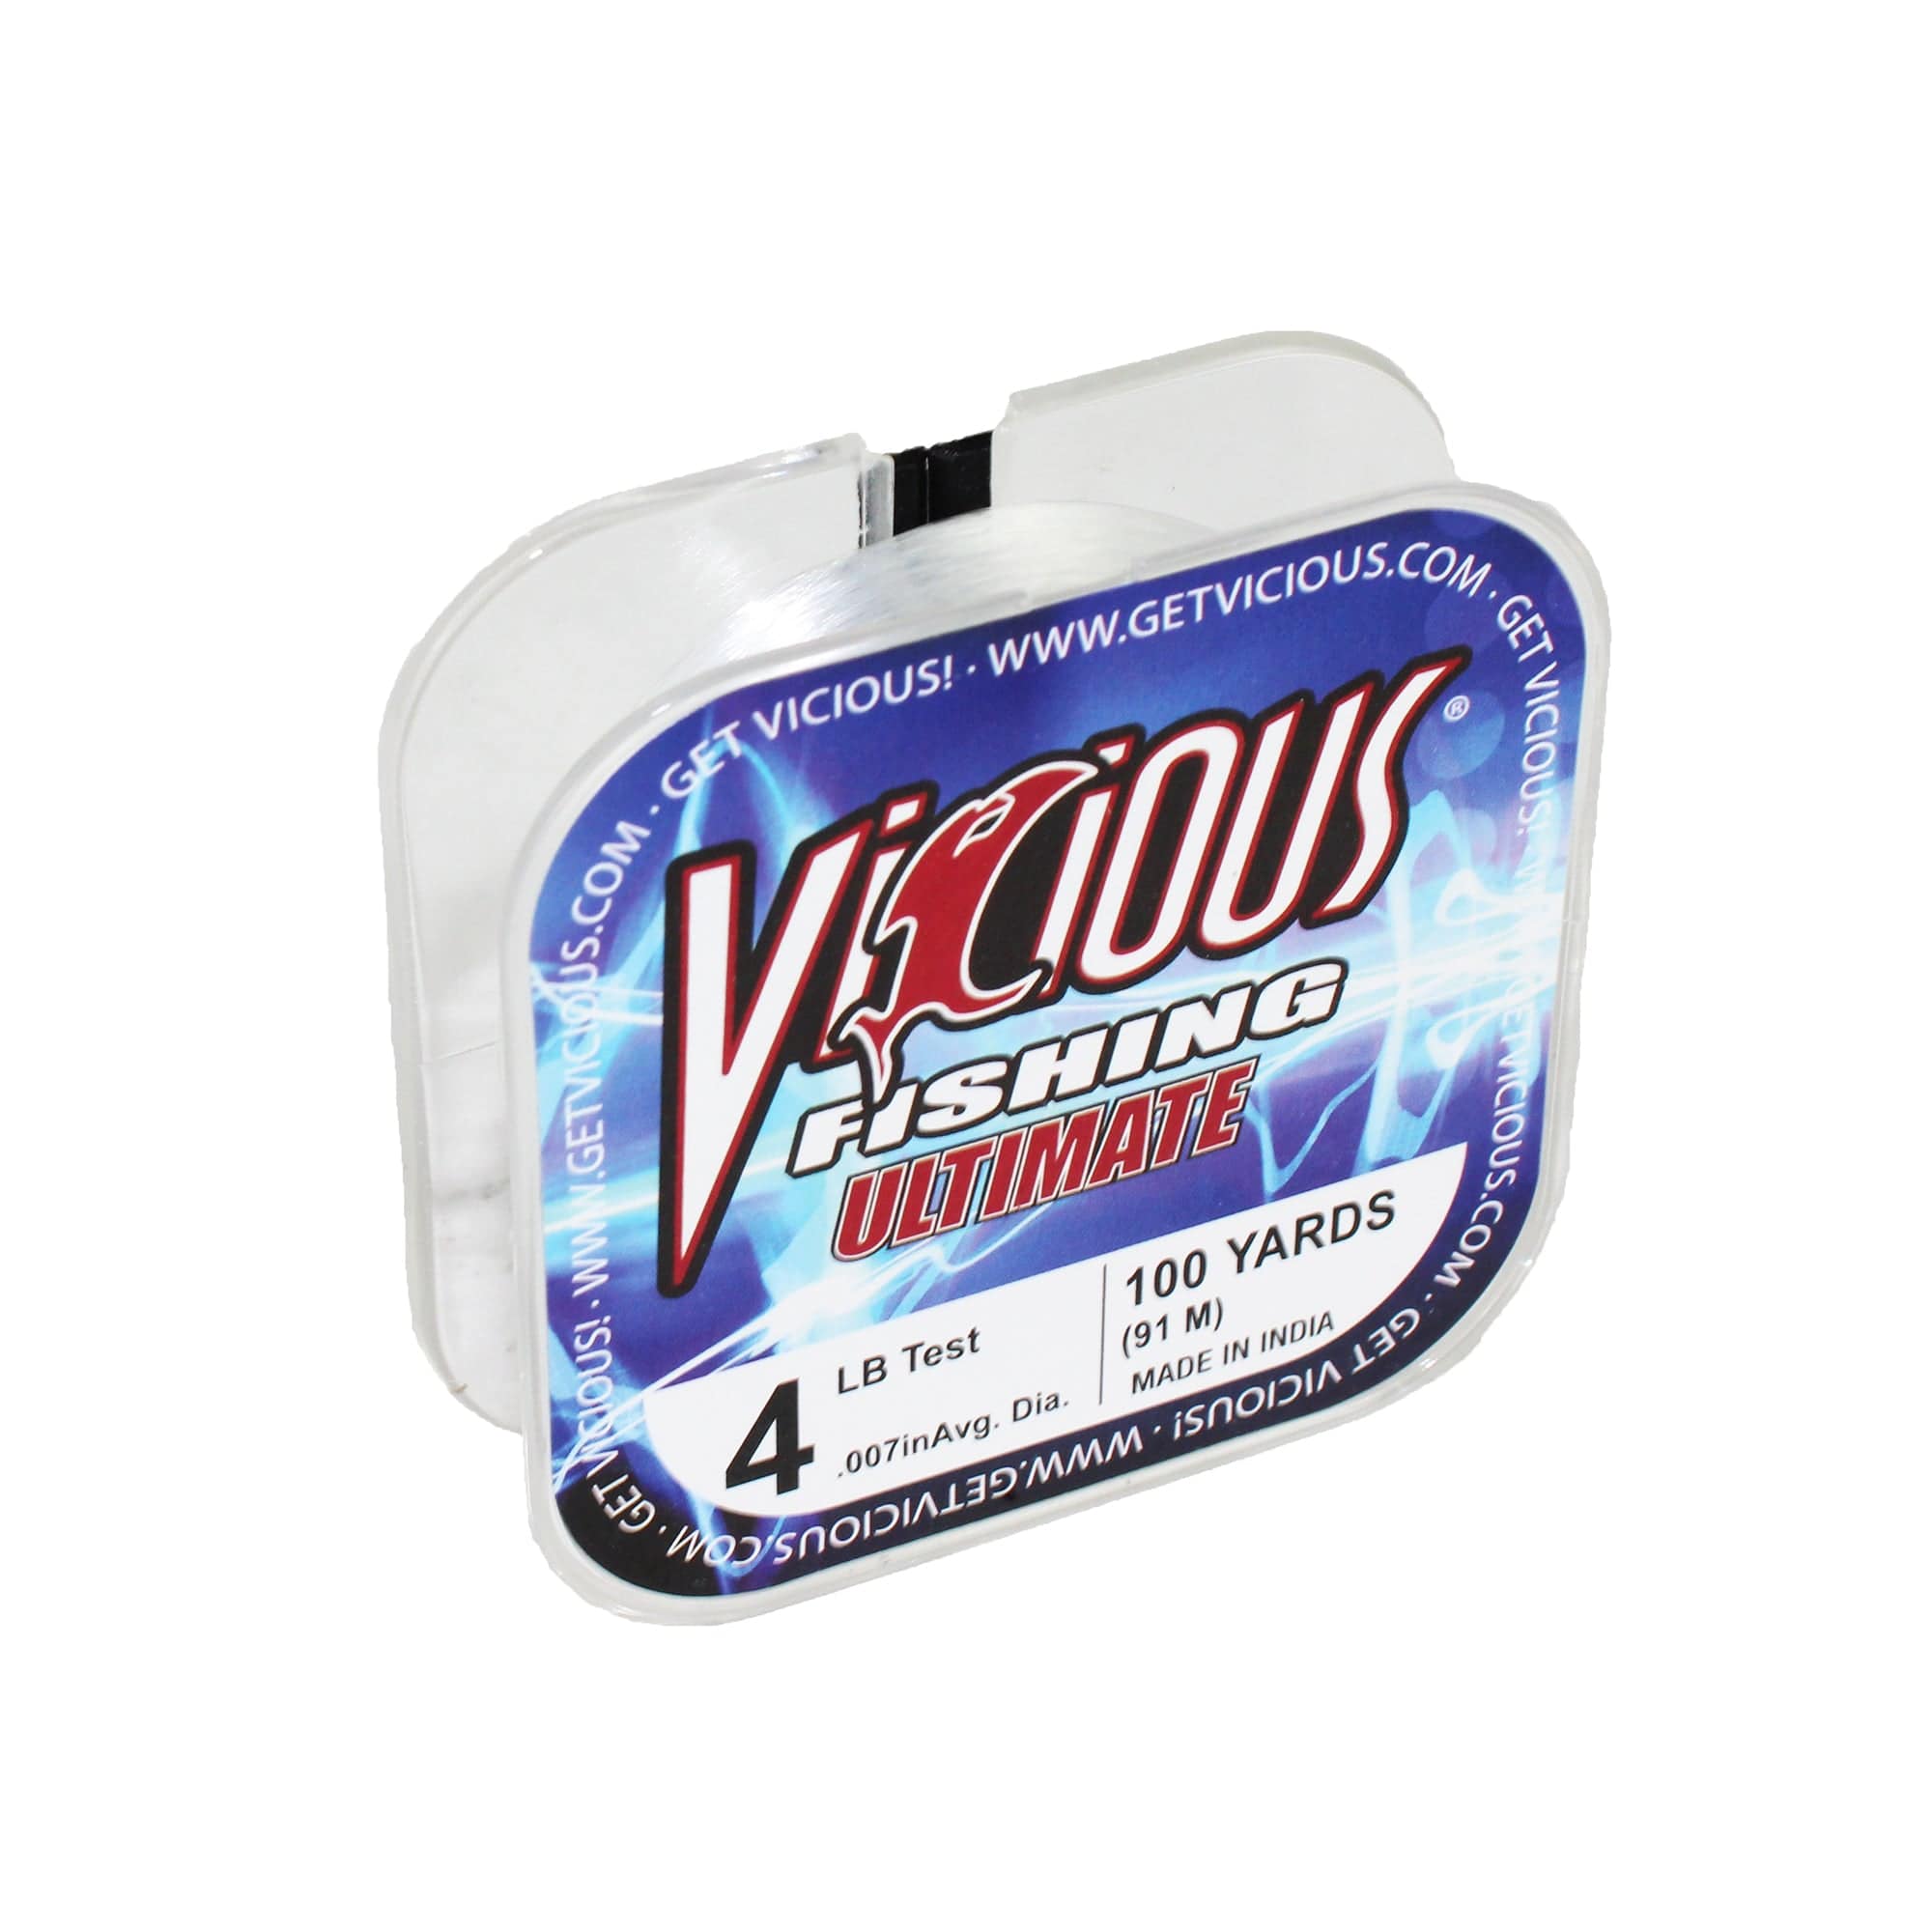 Vicious Fishing Ultimate Clear / 8 lb / 330 Yards